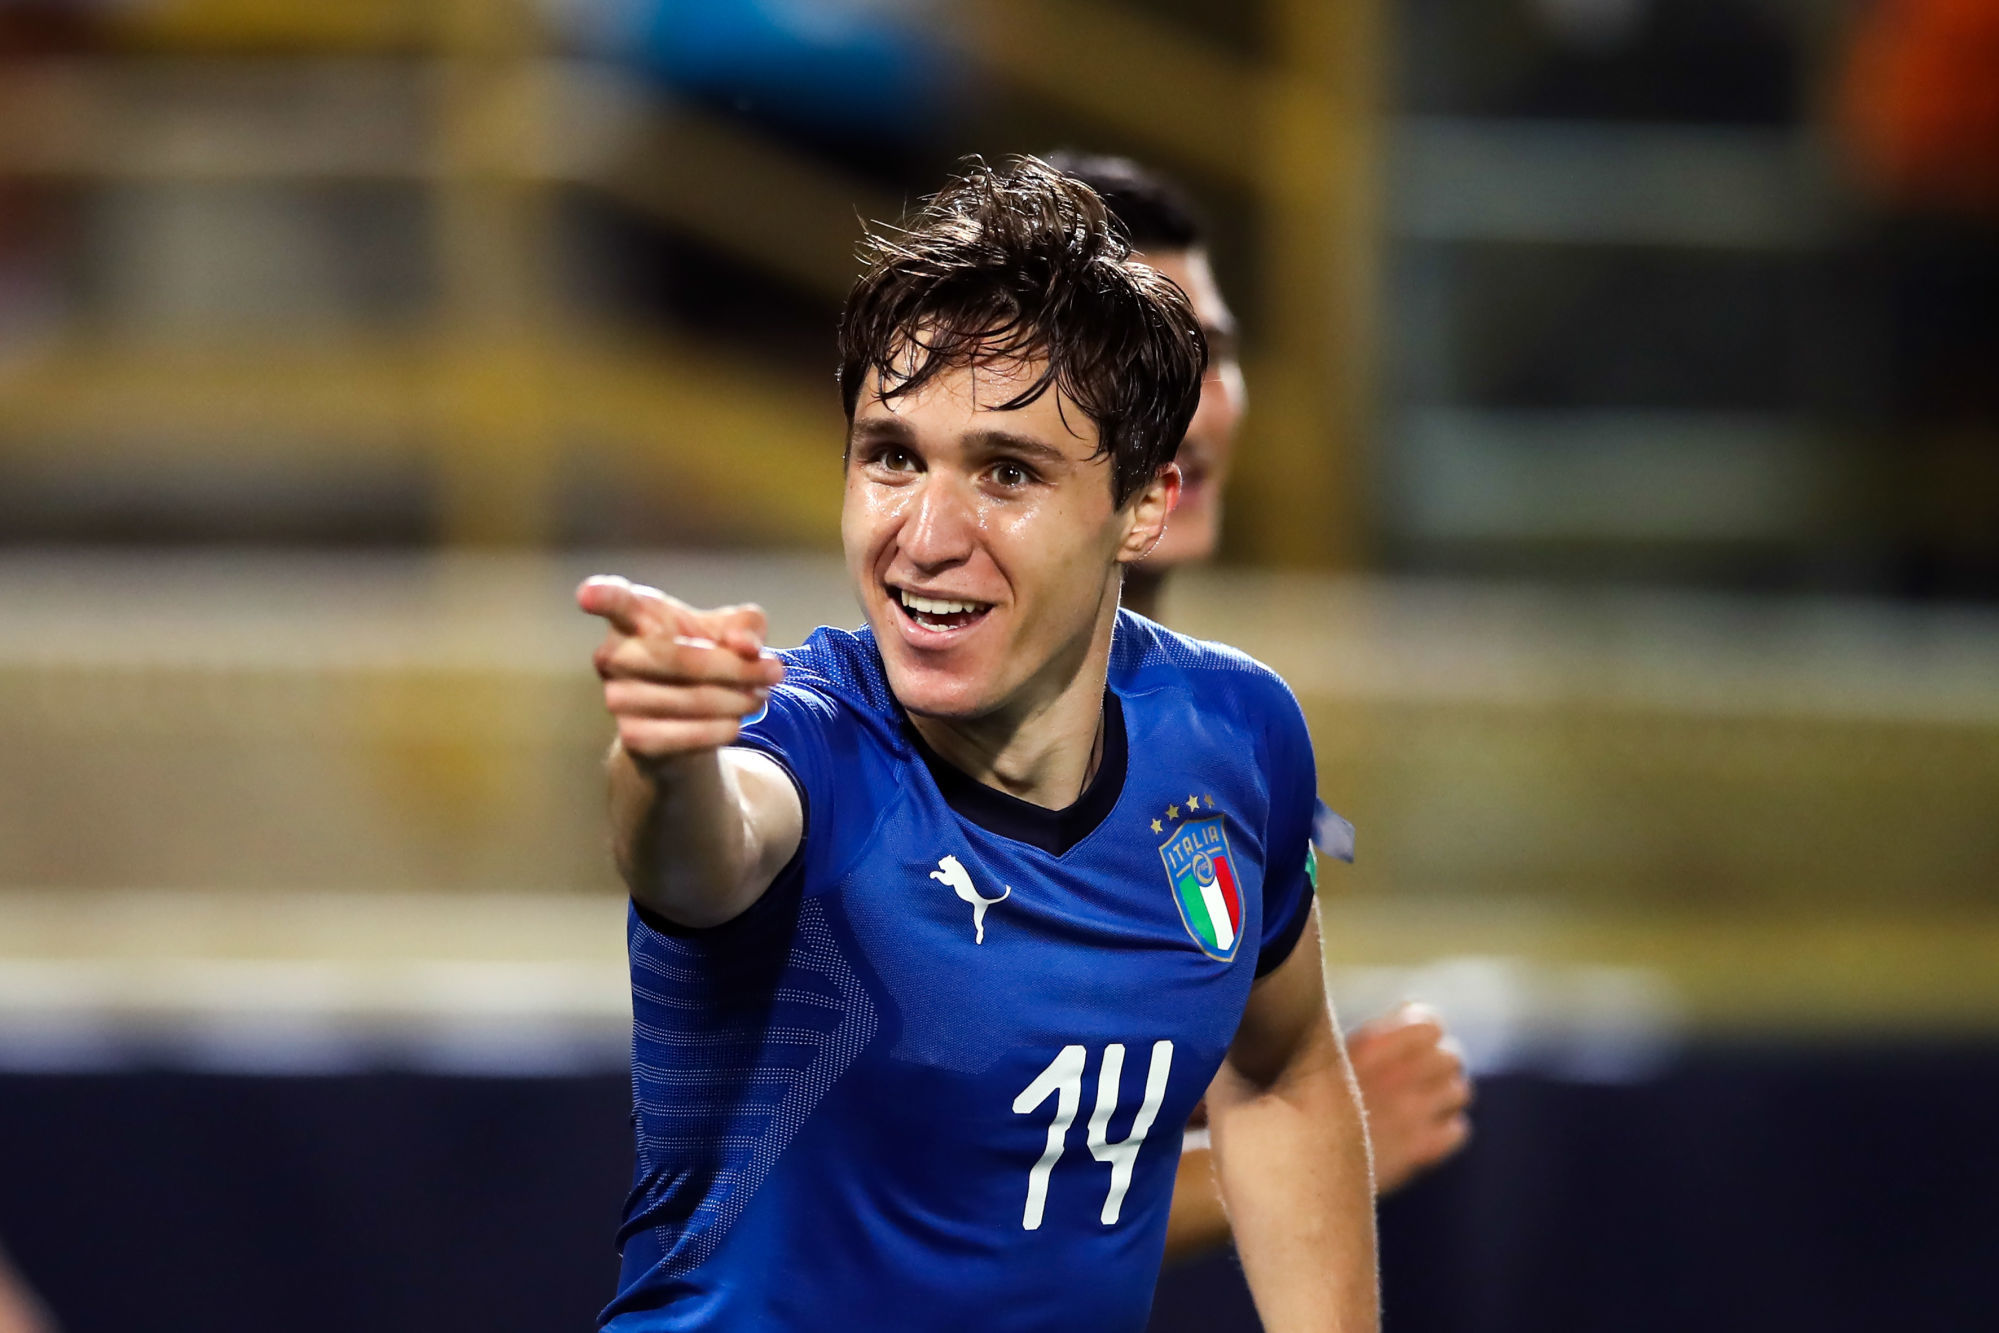 Federico Chiesa of Italy celebrates after scoring his second goal to give the side a 2-1 lead during the UEFA Under-21 Championship 2019 match at Renato Dall'Ara, Bologna. Picture date: 16th June 2019. Photo : Spi / Icon Sport